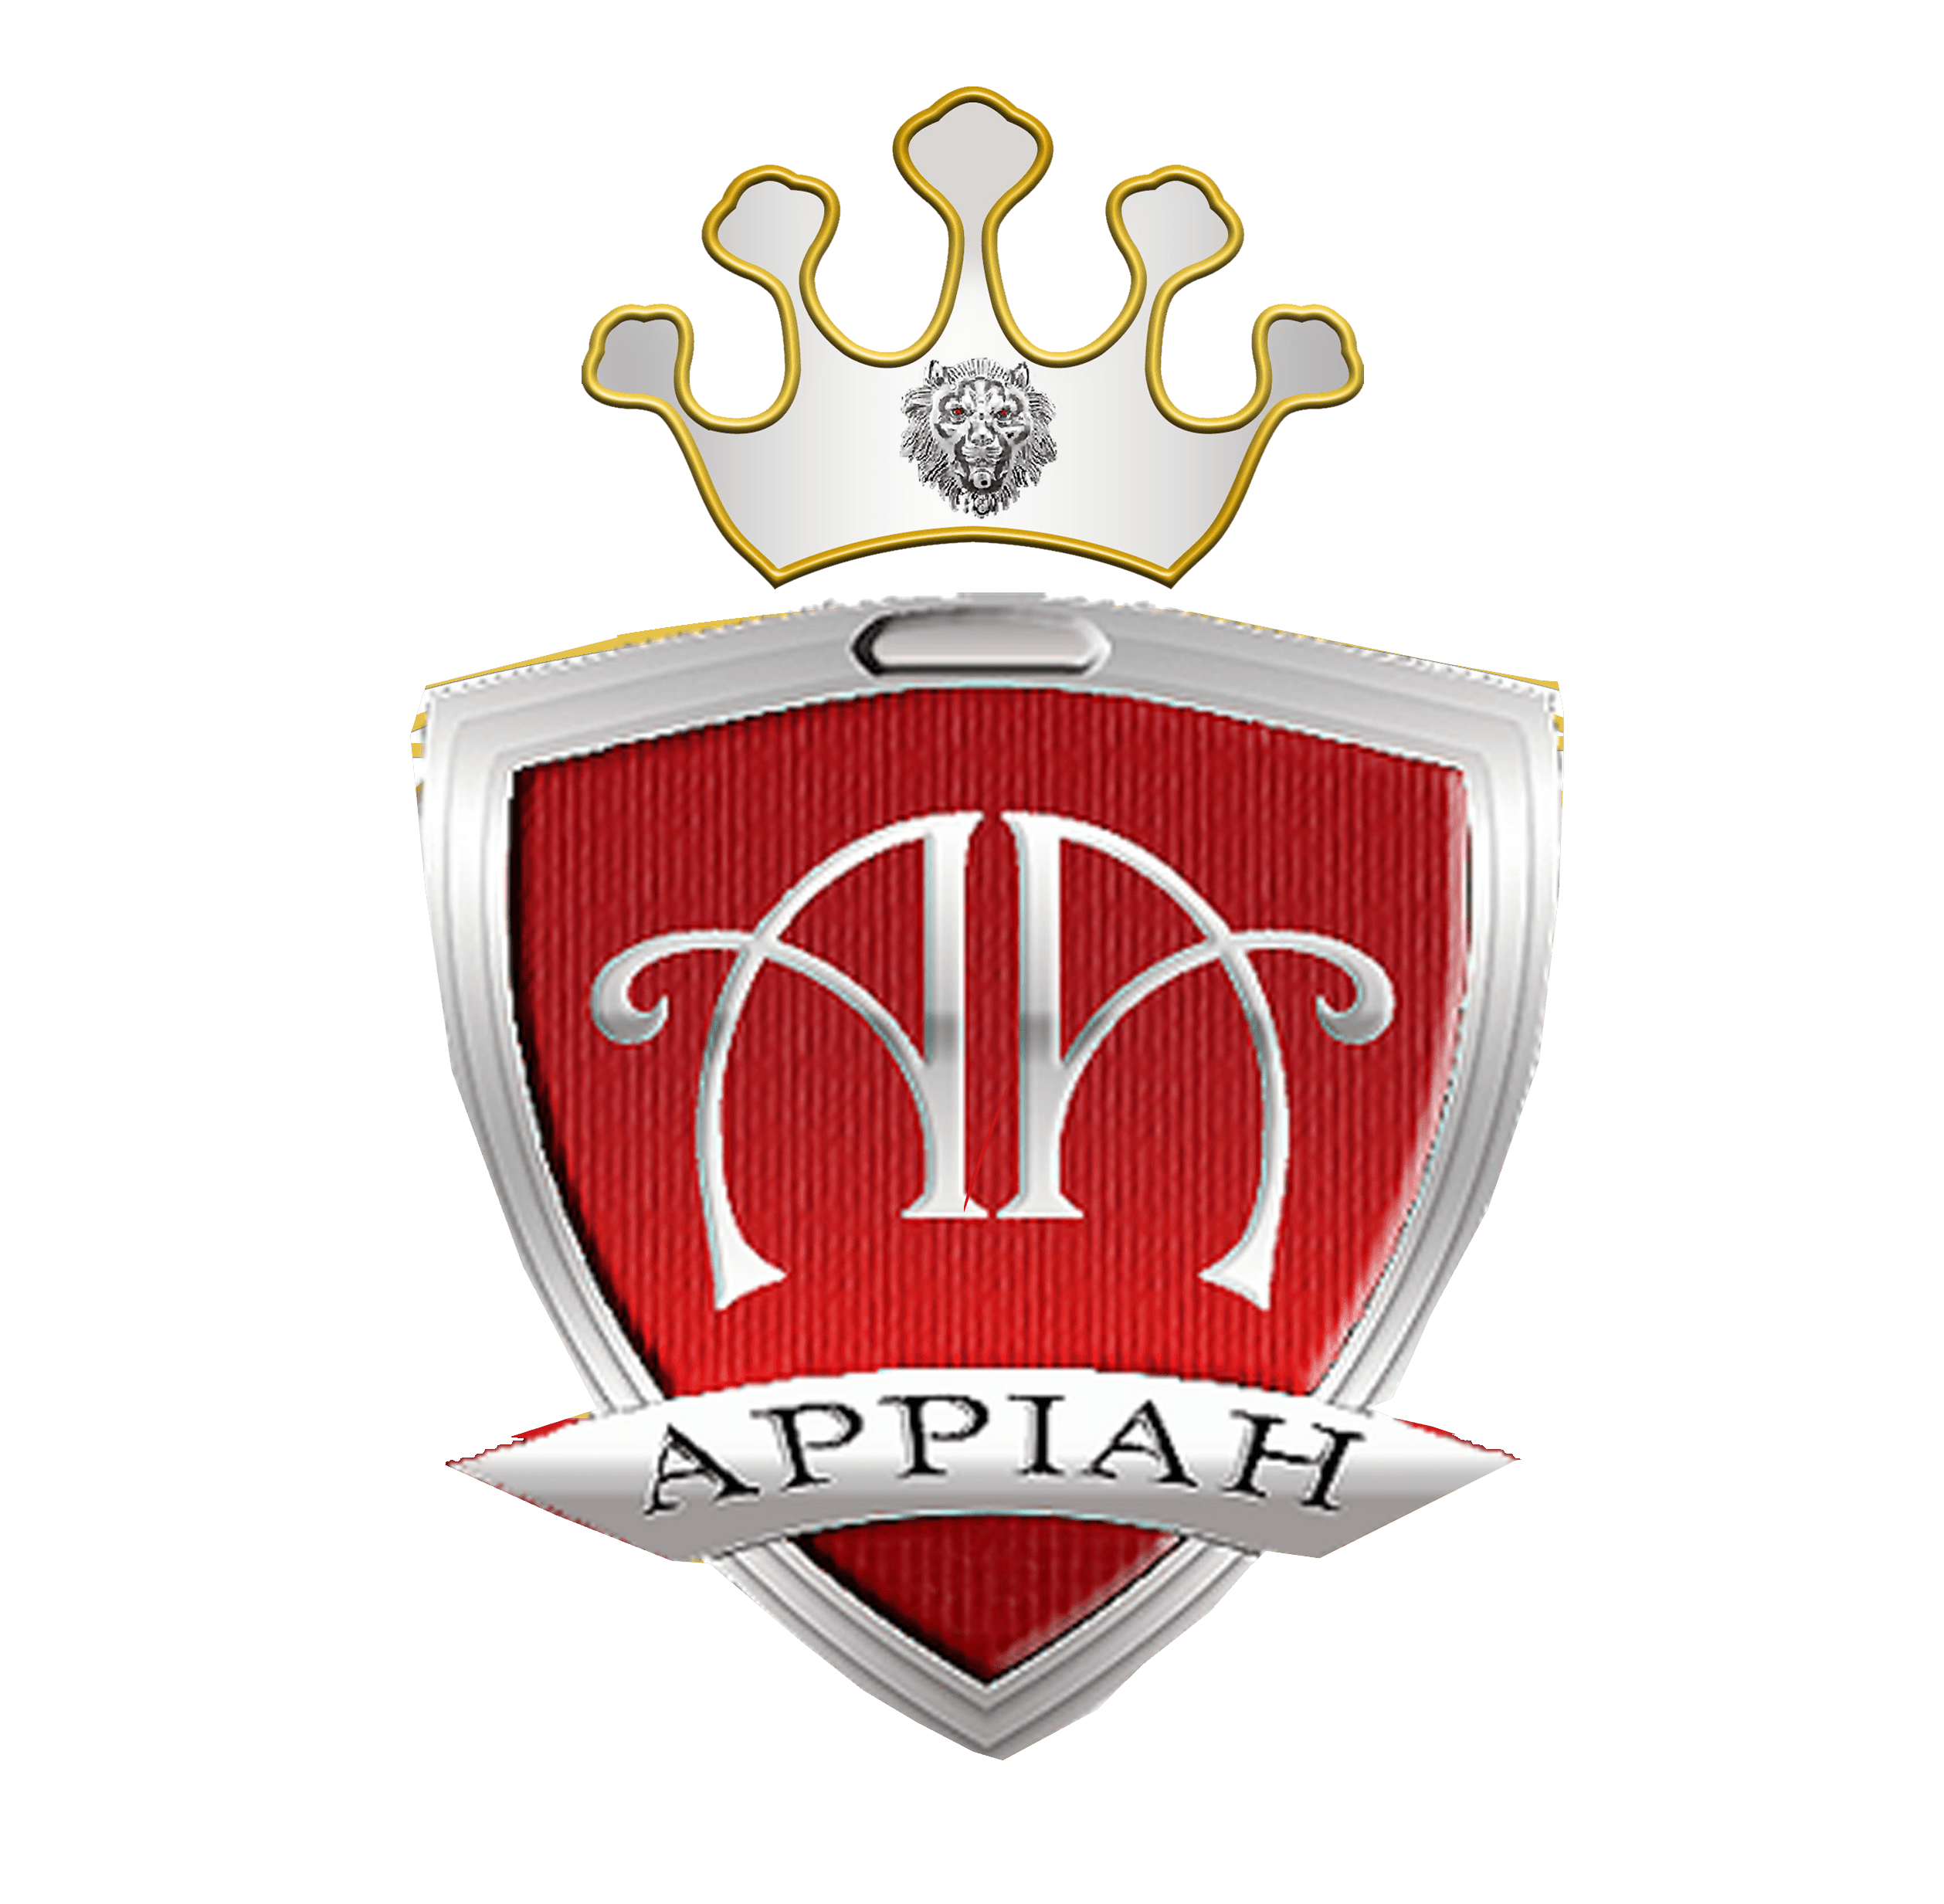 The Appiah Corporation - A Global Real Estate Investment And Advisory Company